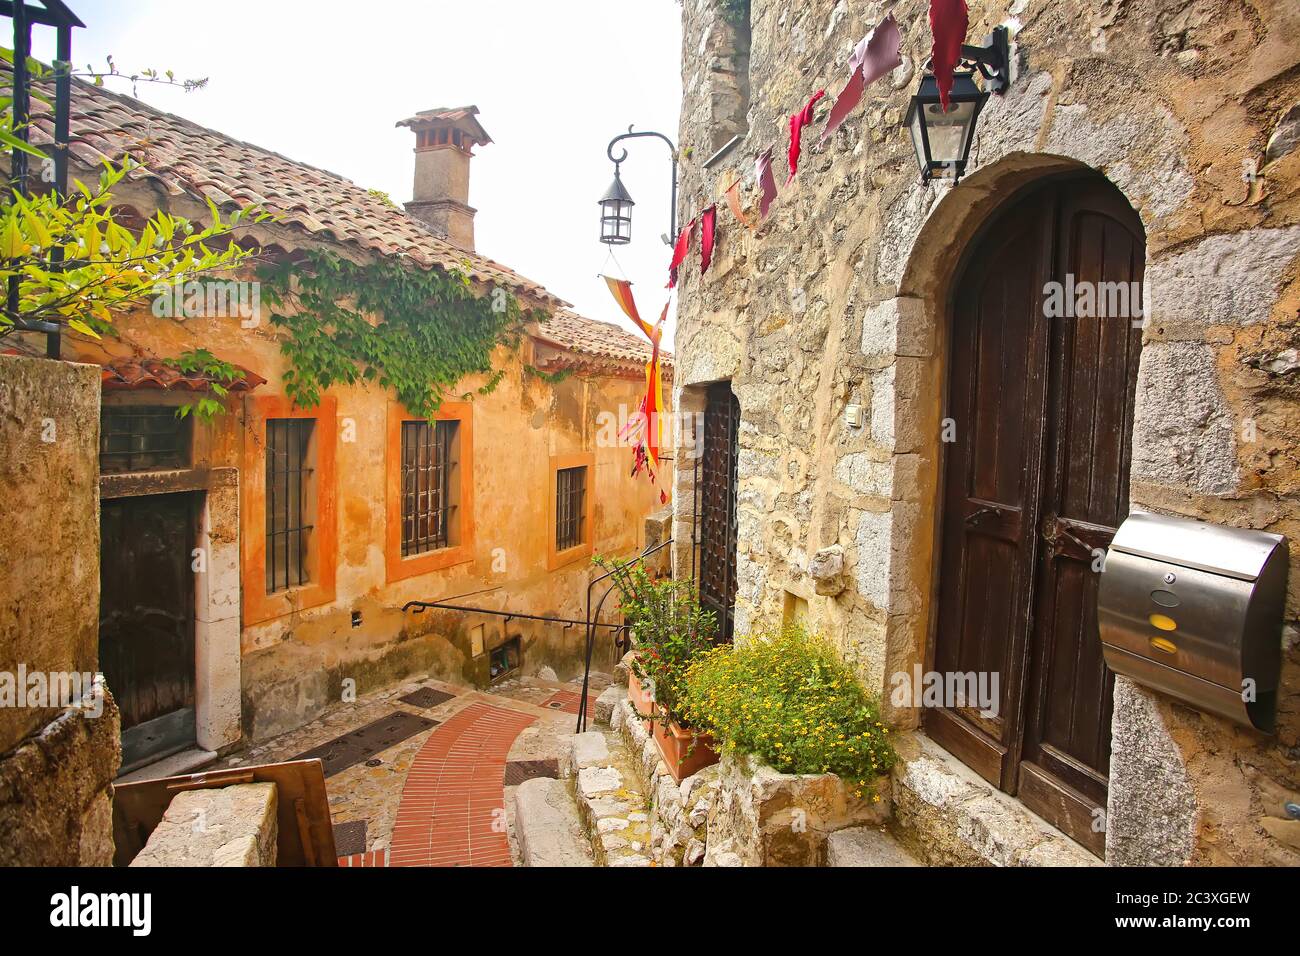 Inside the old streets of the beautiful hilltop medieval village of Eze. Historic buildings with atmosphere, French Riviera, south of France. Stock Photo